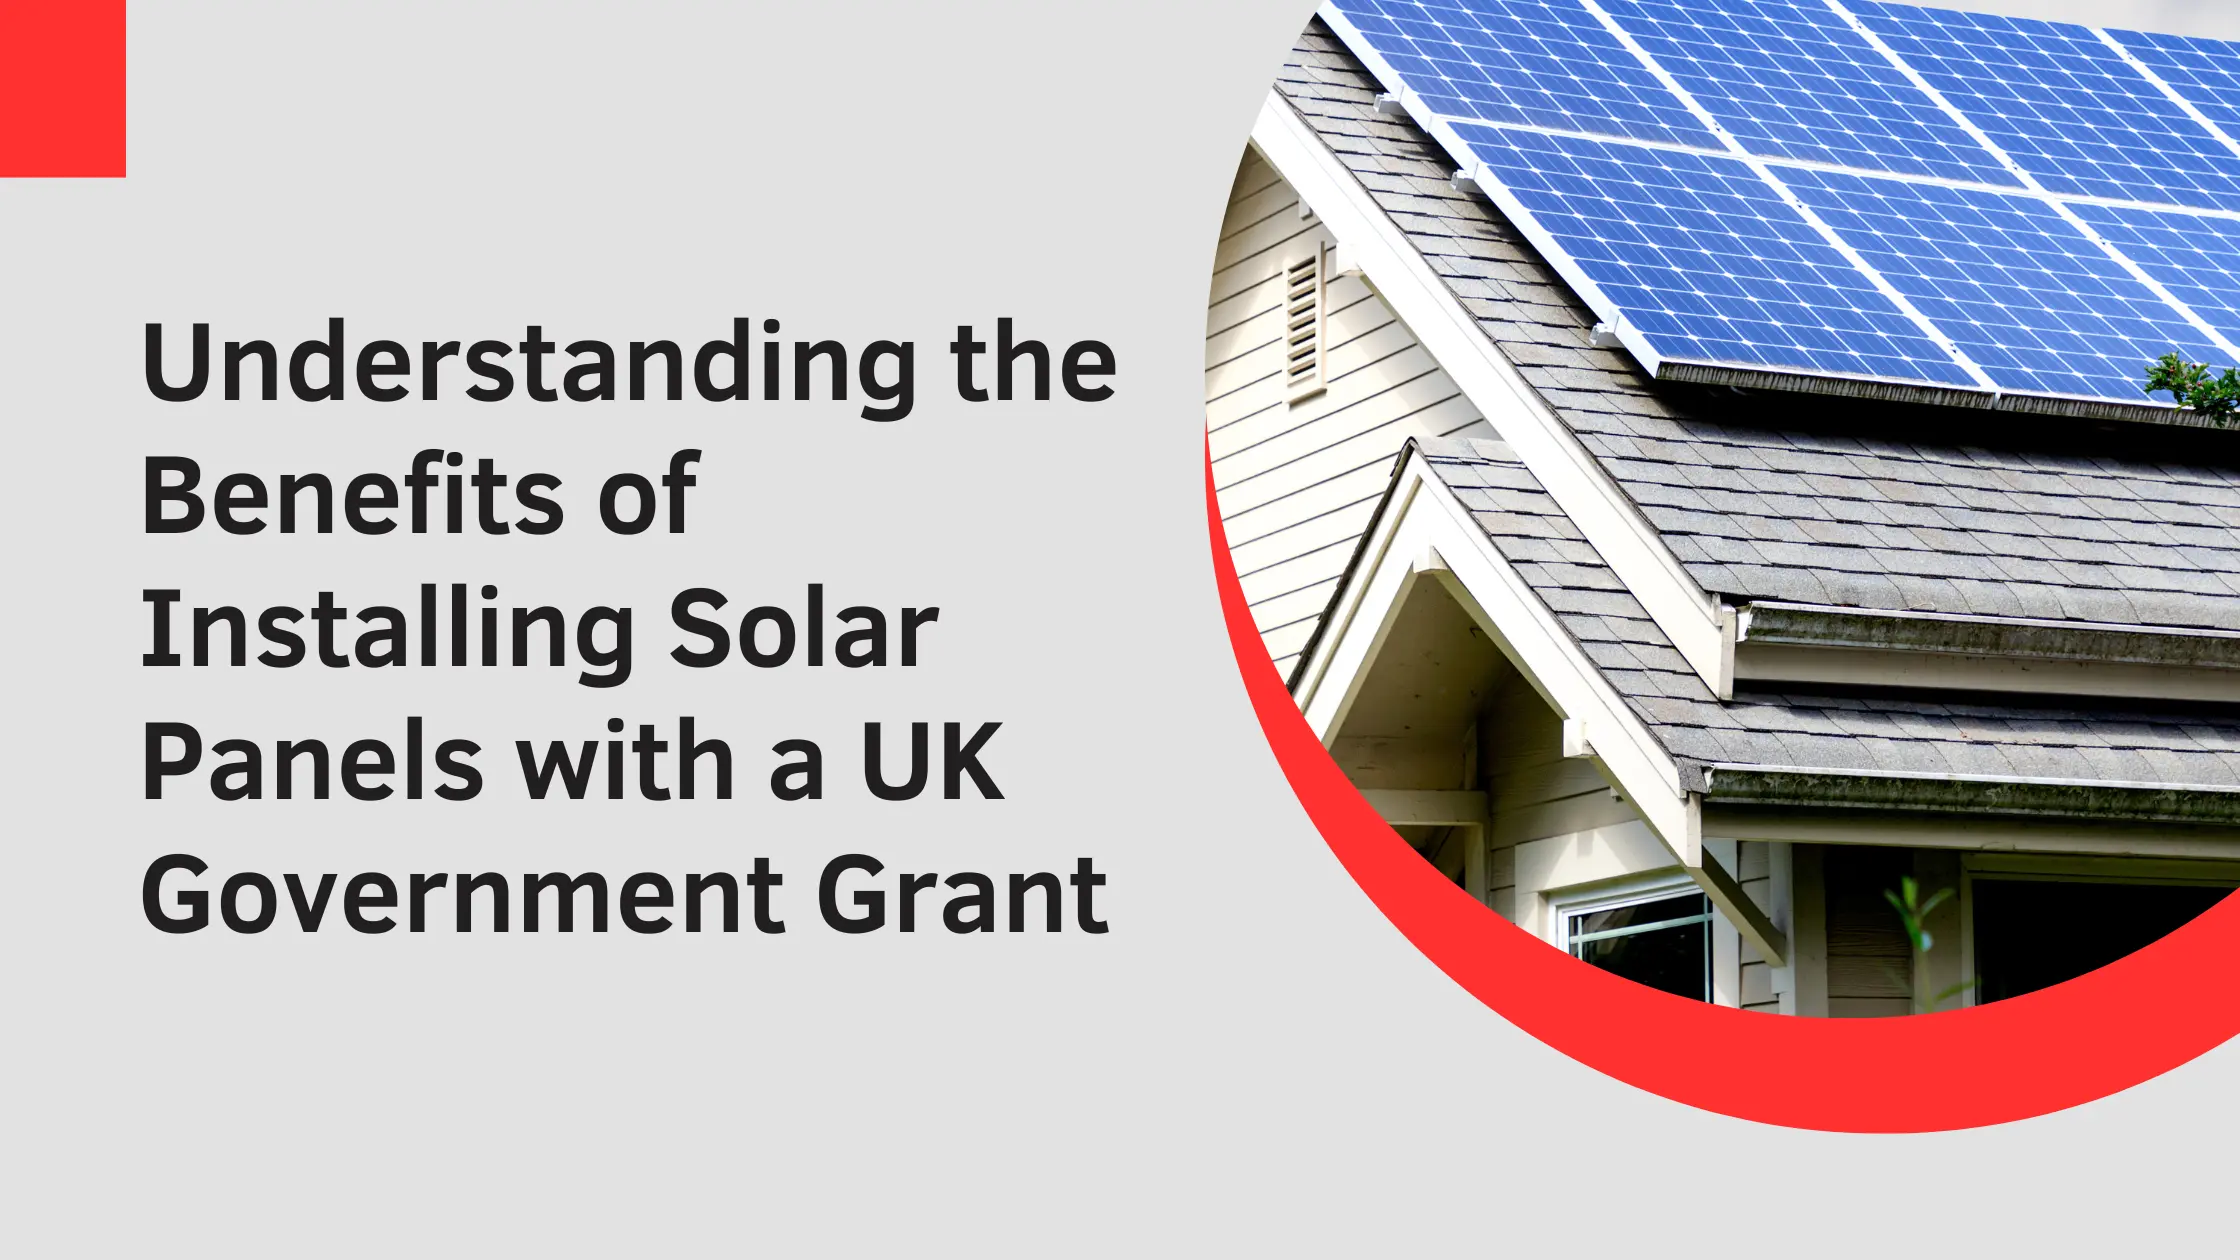 government grant of solar panels for homeowners in wolverhampton - What is the eco scheme in Wolverhampton